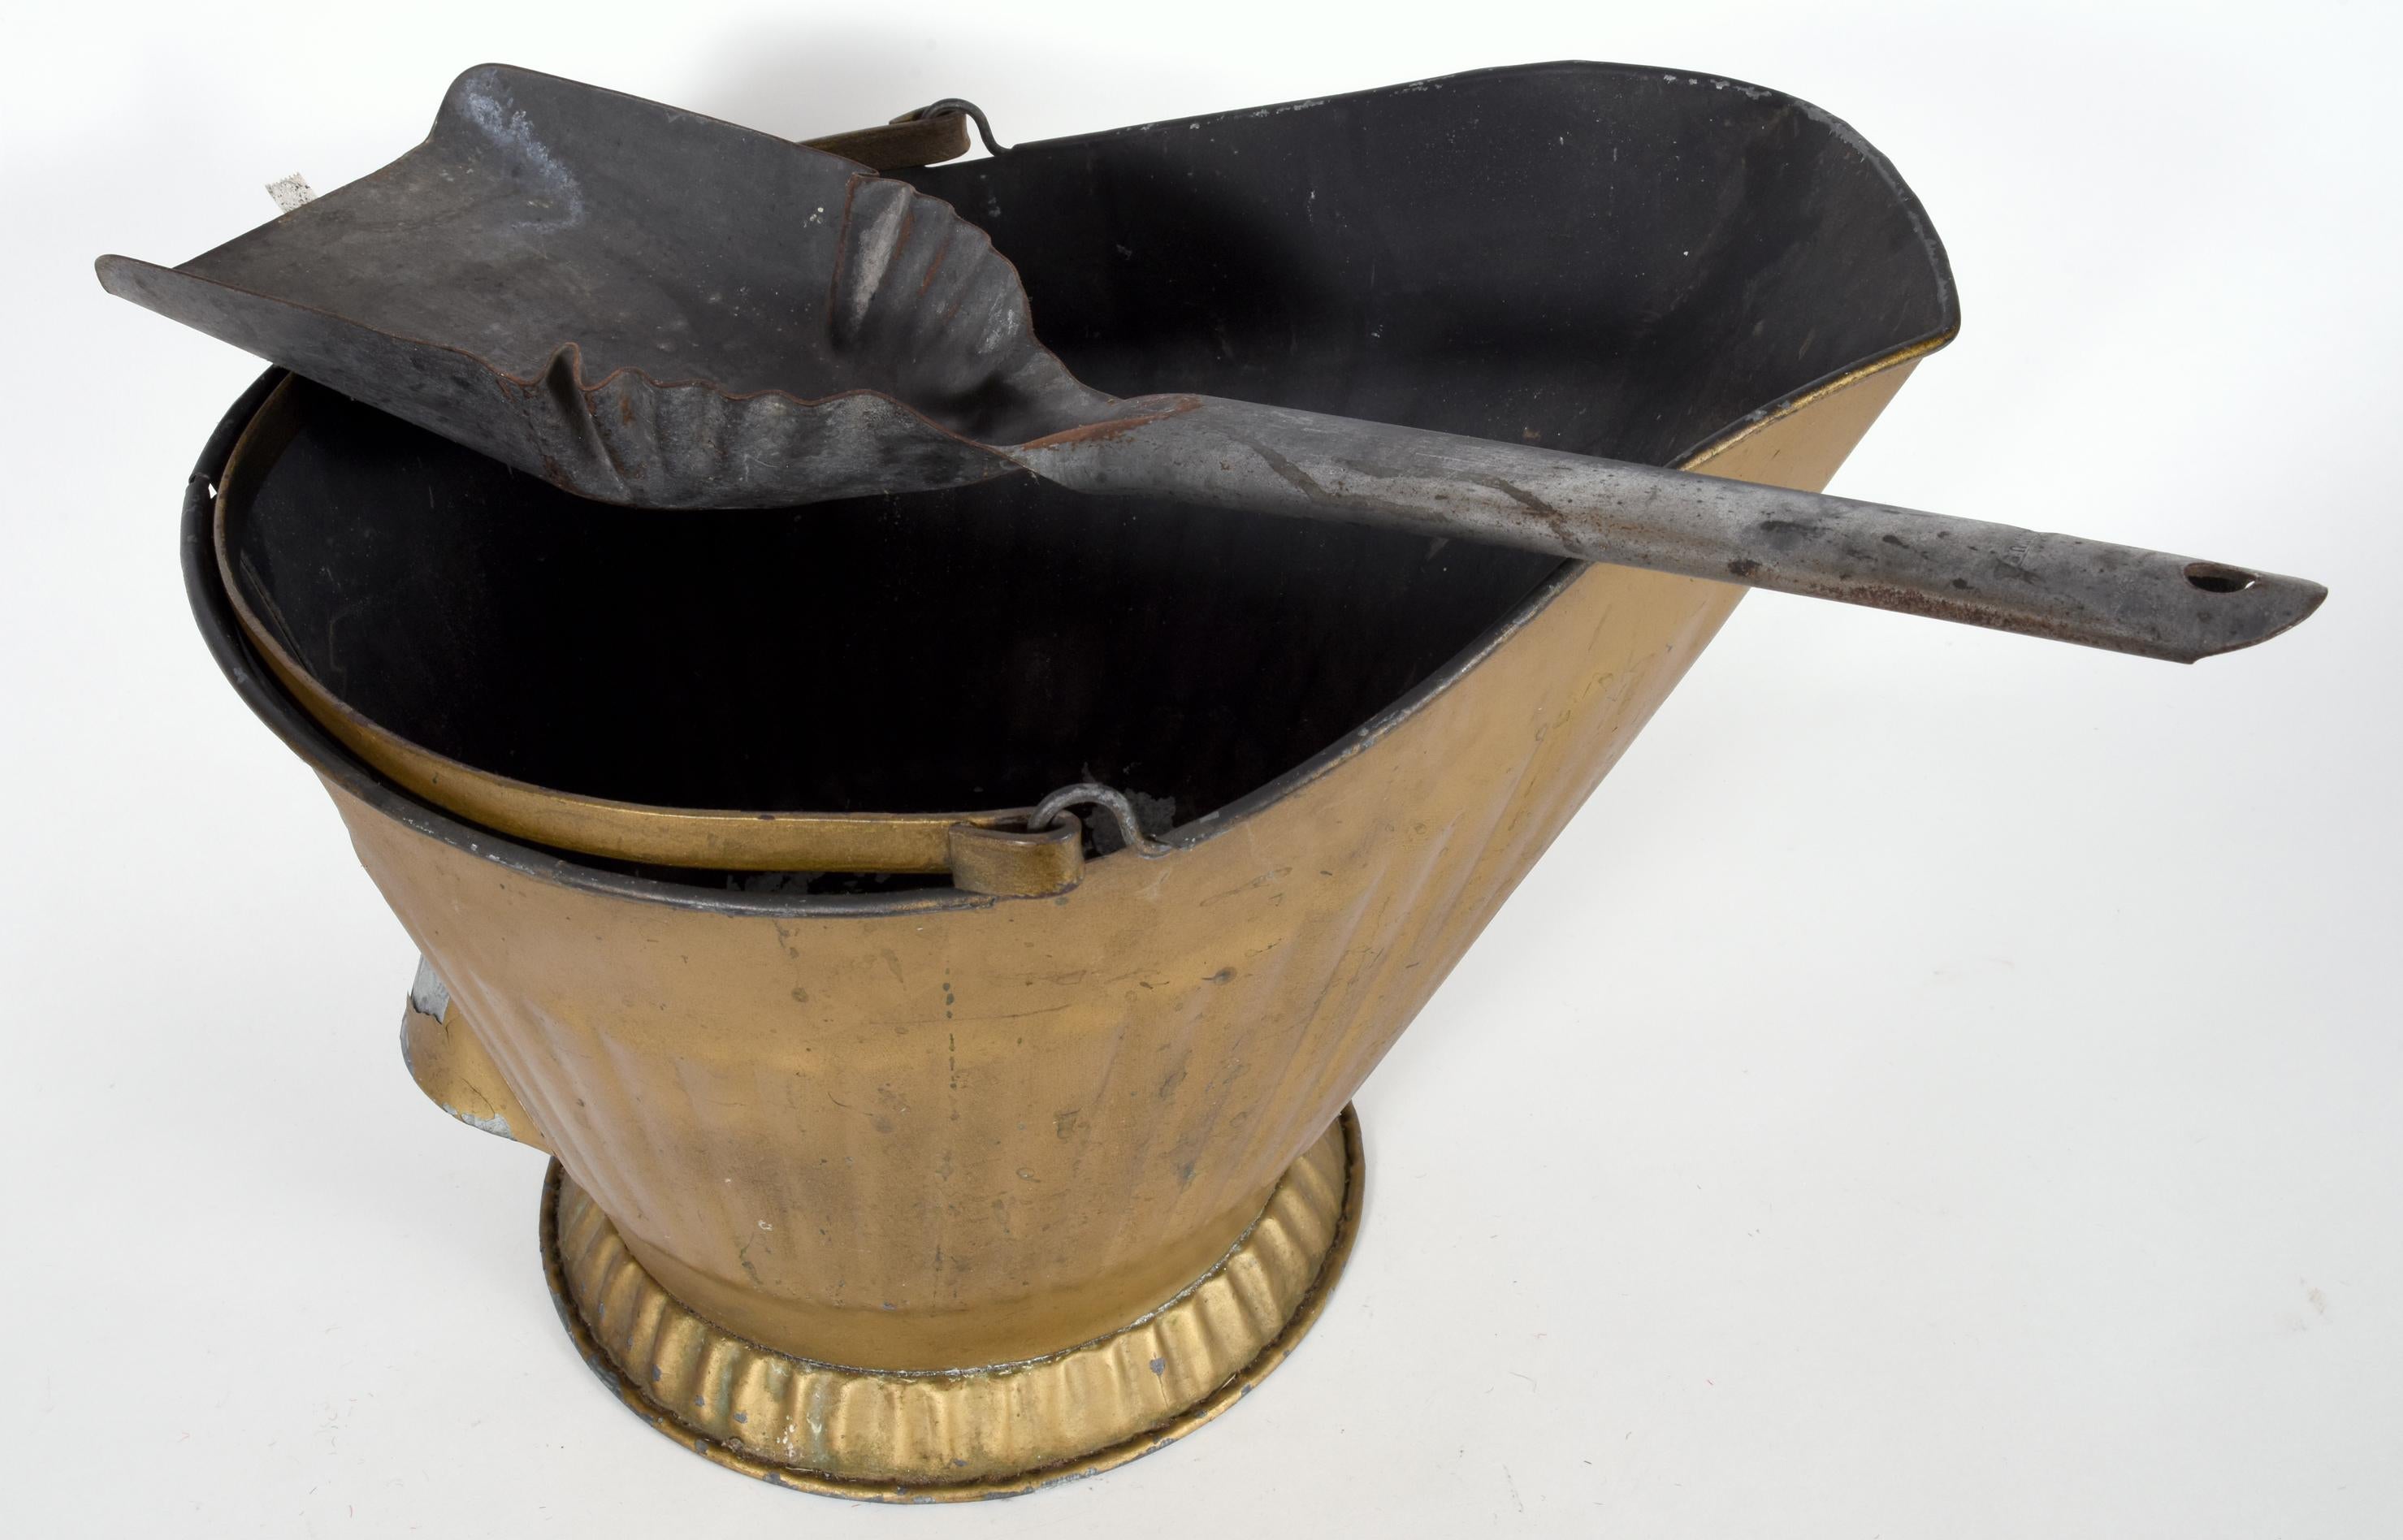 Mid-20th century coal scuttle fire place bucket with scooper. The coal scuttle bucket is in excellent vintage used condition. The bucket measure about 16 inches diameter x 12 inches high with handle down. The scooper is about 20.5 inches x 5 inches.